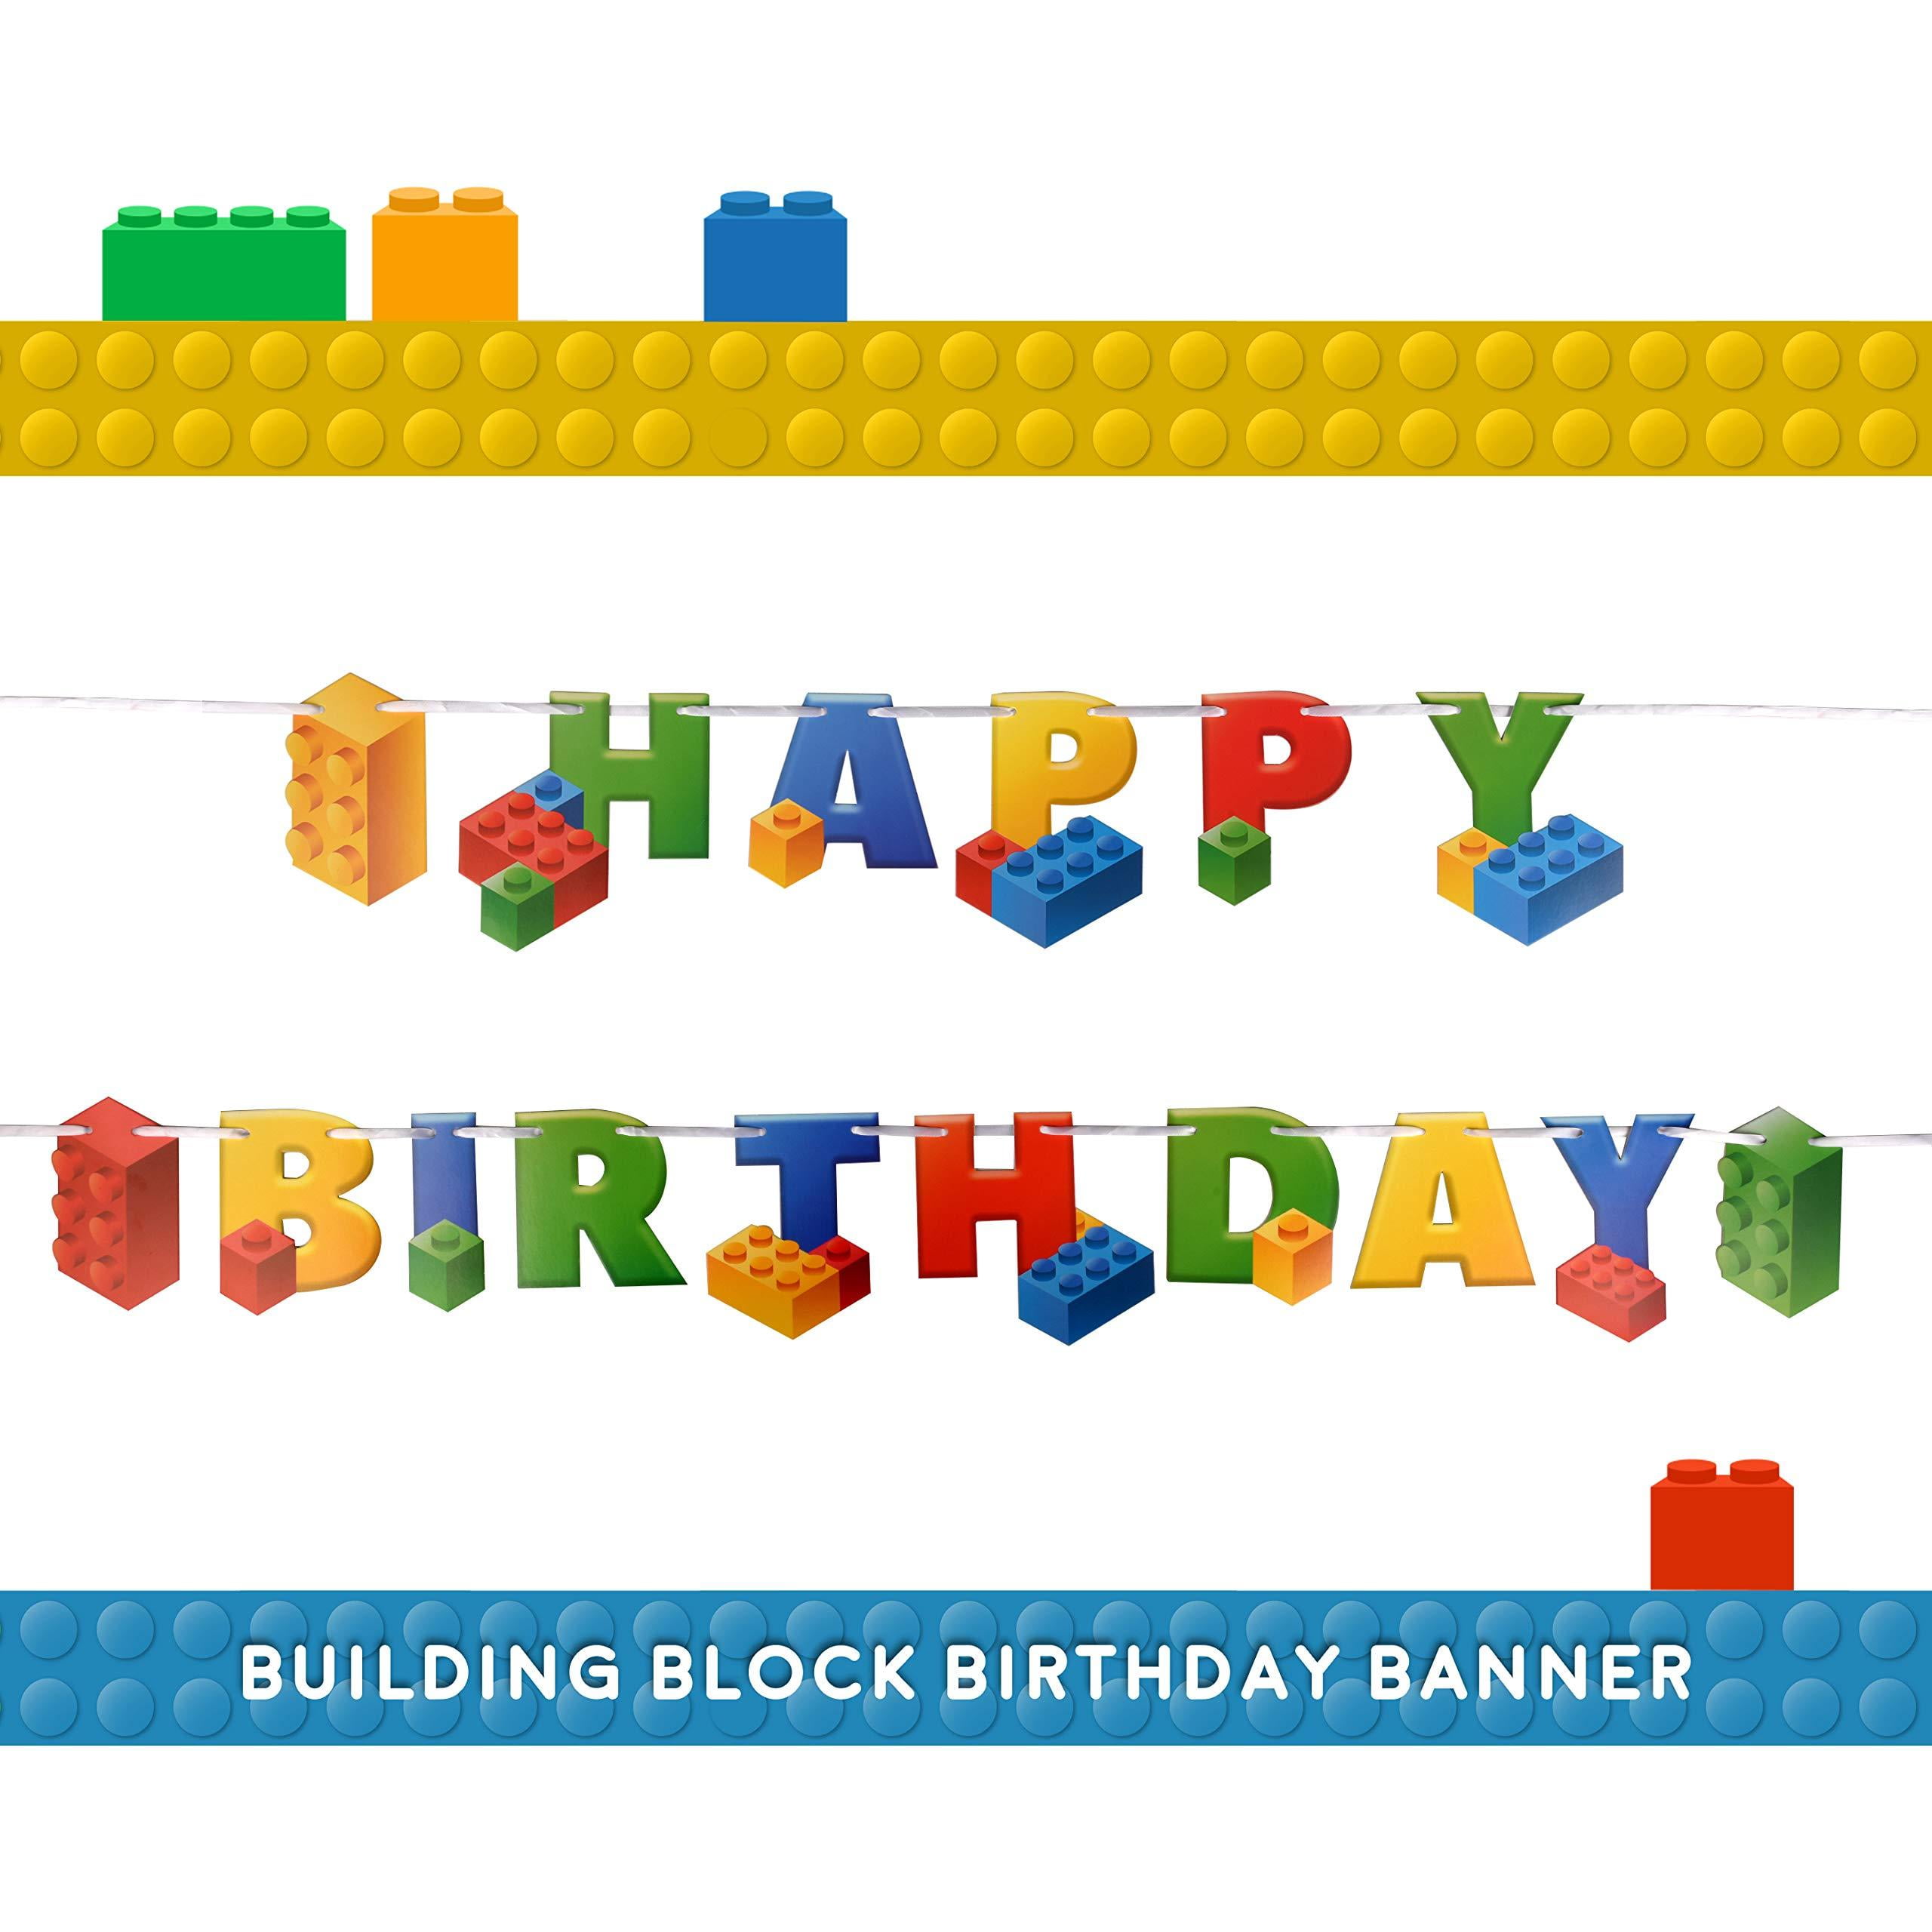 Building Block Party Decorations Brick and Block Birthday Banner for Kids Boys Building Block Themed Birthday Party Supplies with Banners Cake Toppers and Latex Balloons